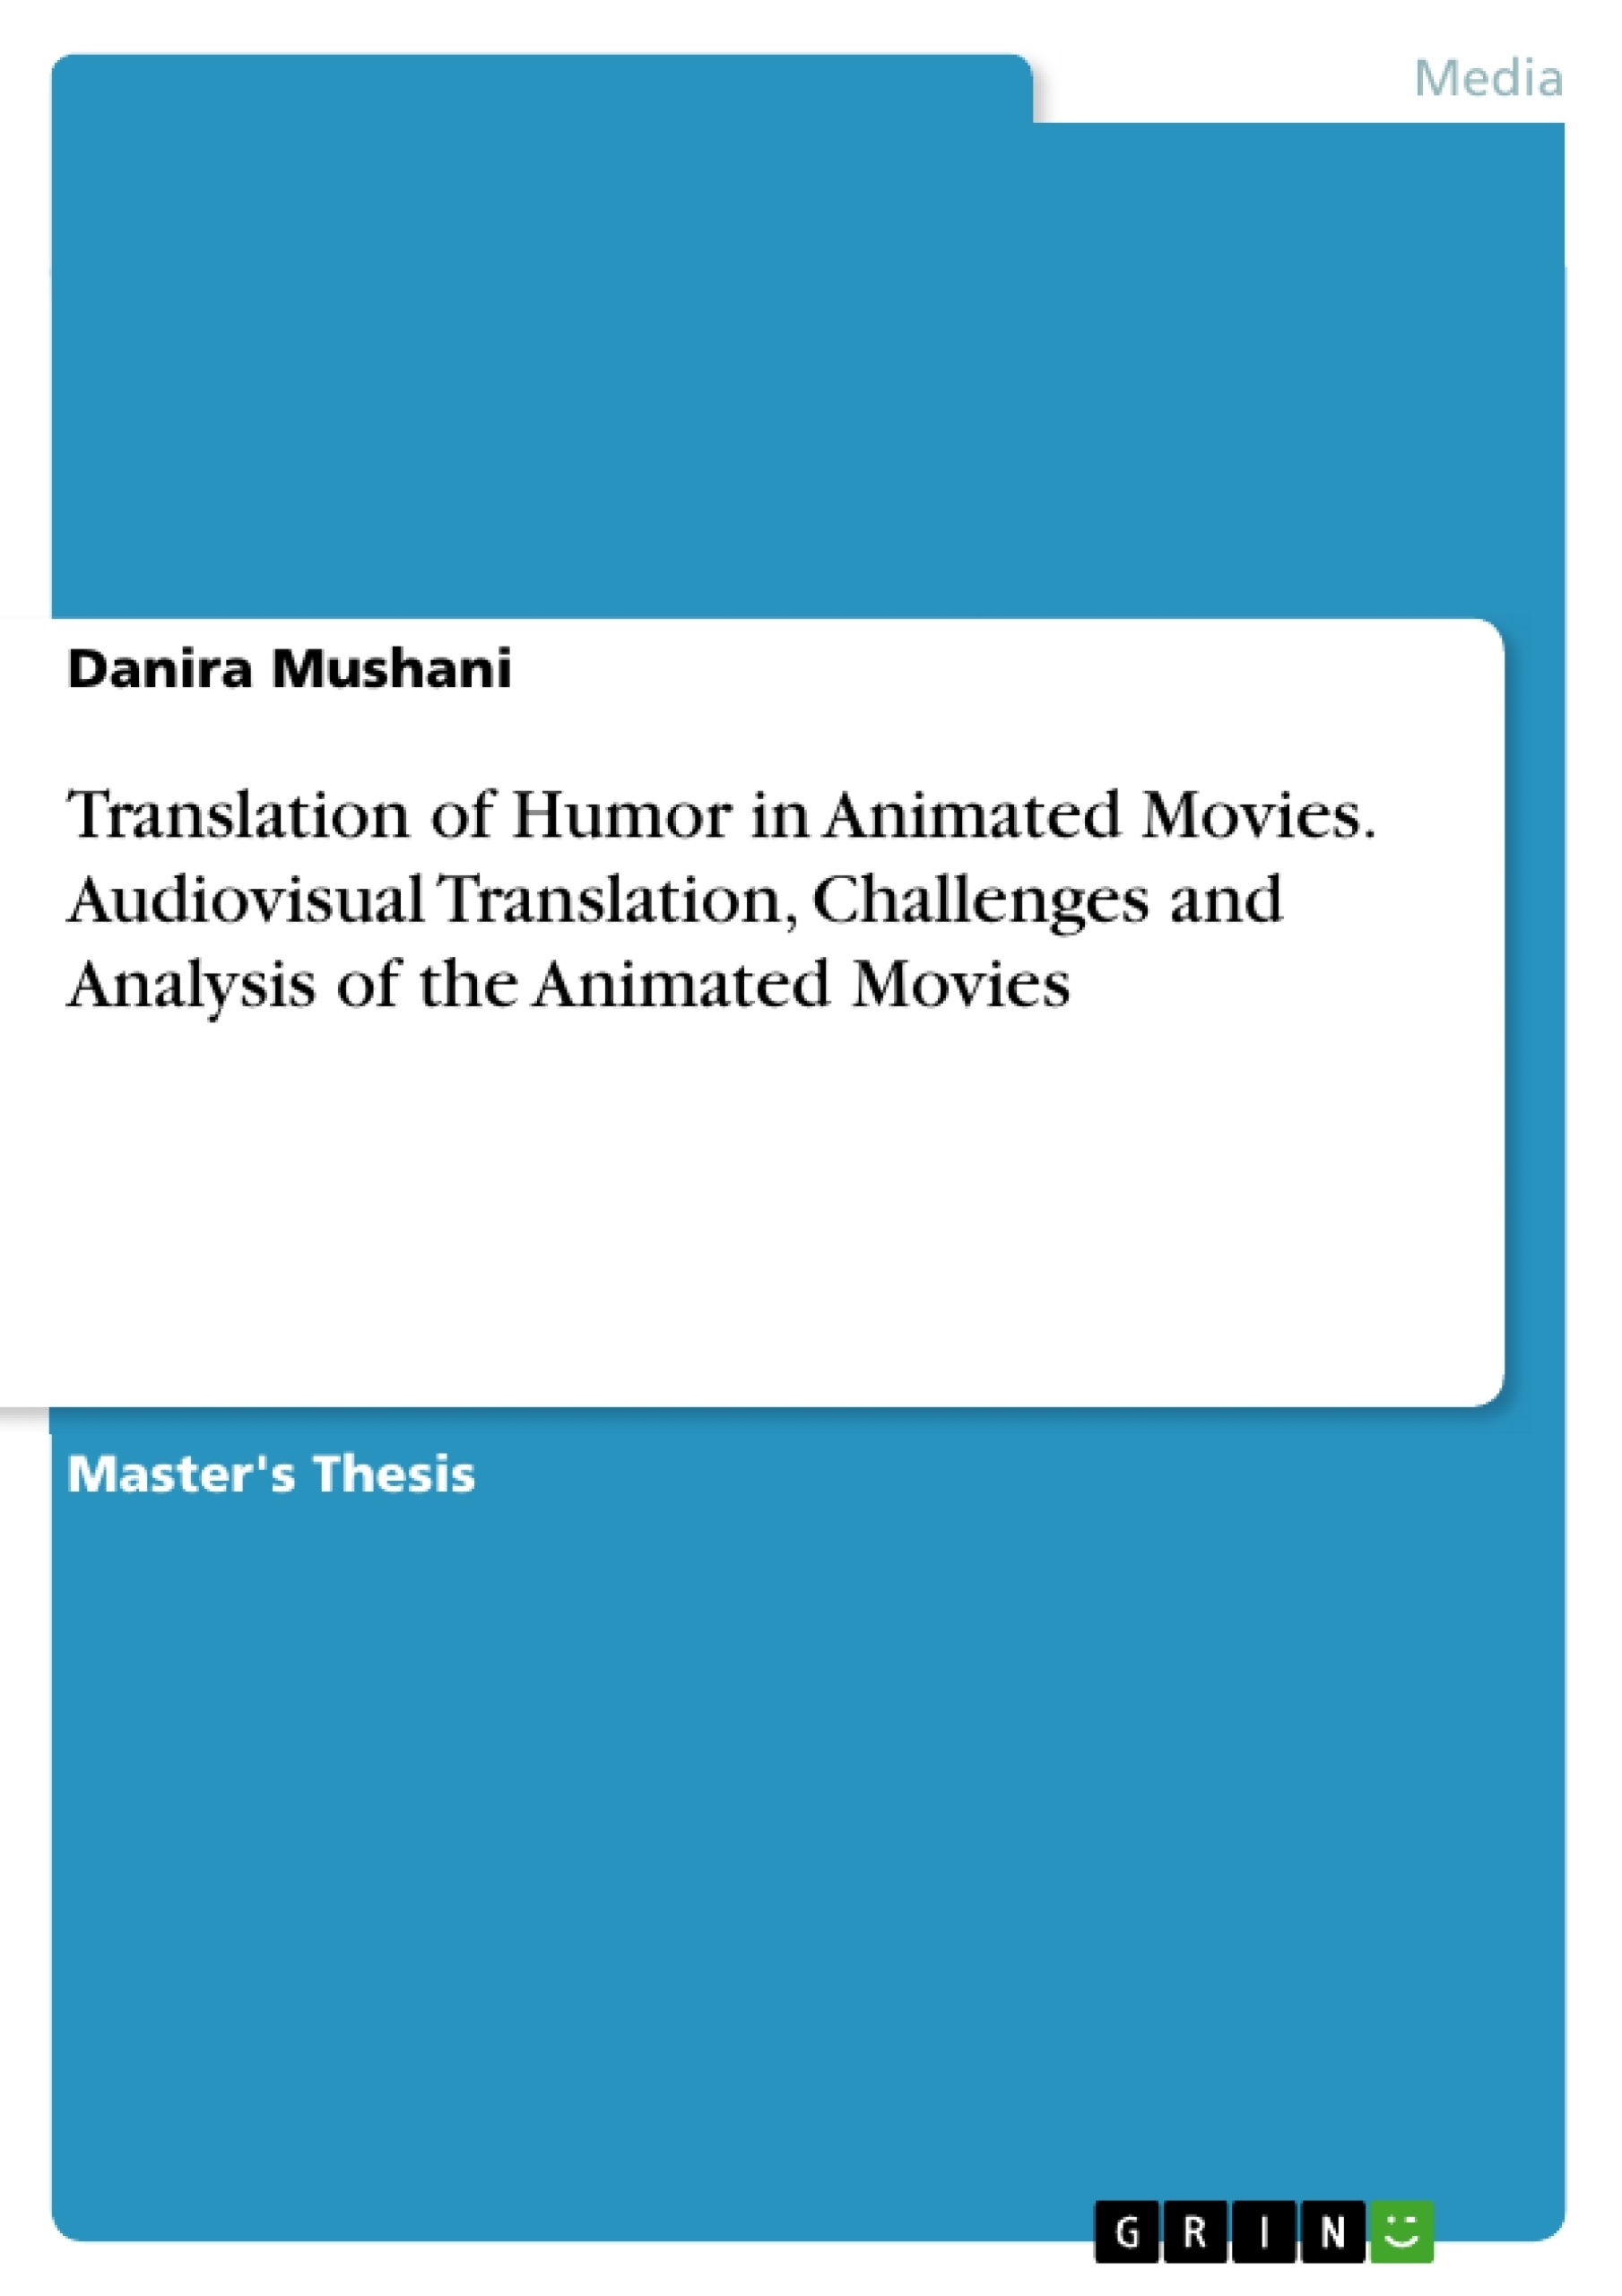 Title: Translation of Humor in Animated Movies. Audiovisual Translation, Challenges and Analysis of the Animated Movies